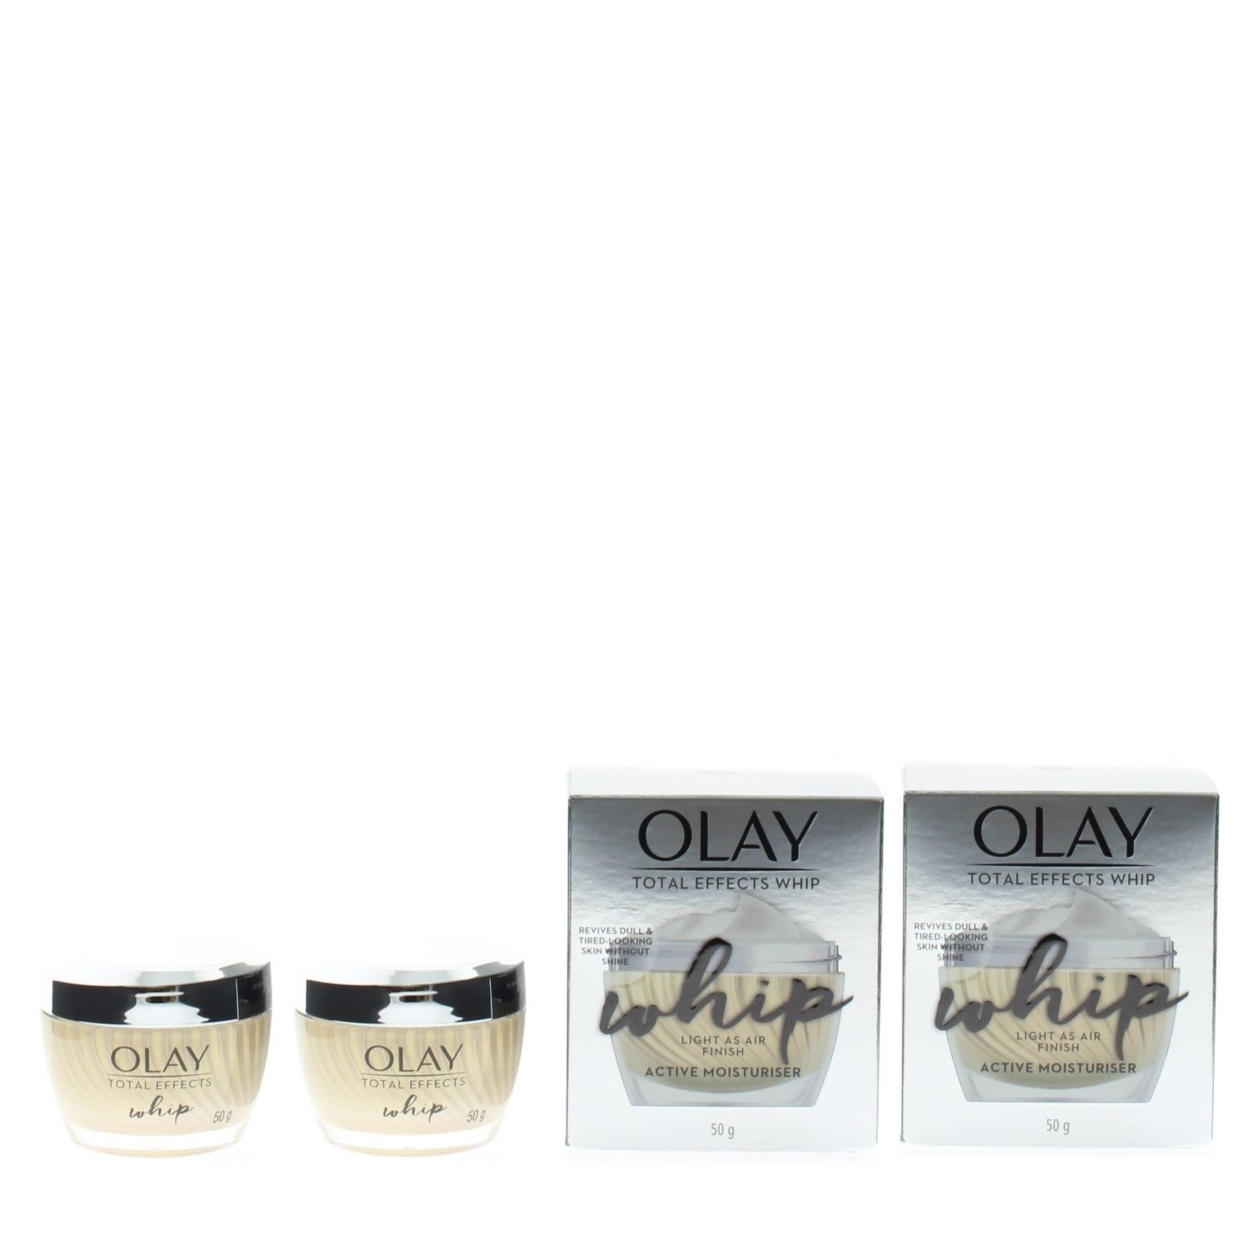 Olay Total Effects Whip Light As Air Finish Active Moisturiser 50g (2 Pack)